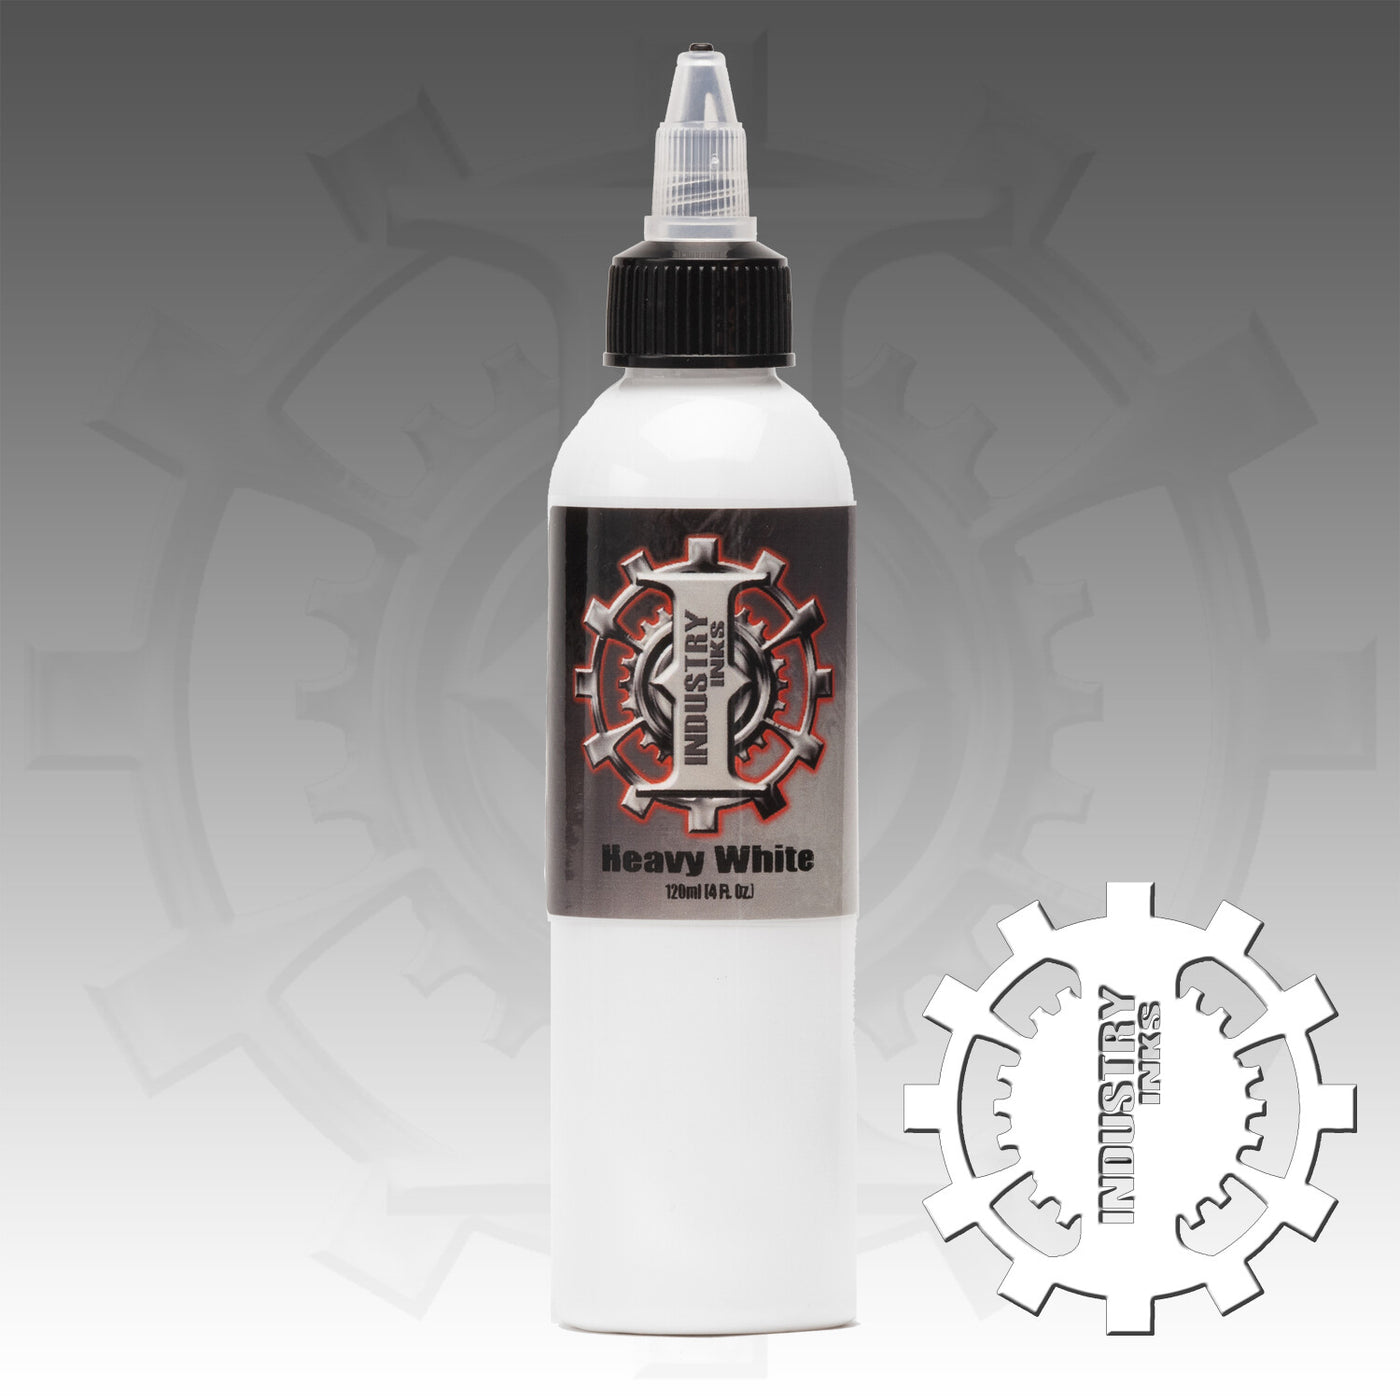 Industry Ink Heavy White